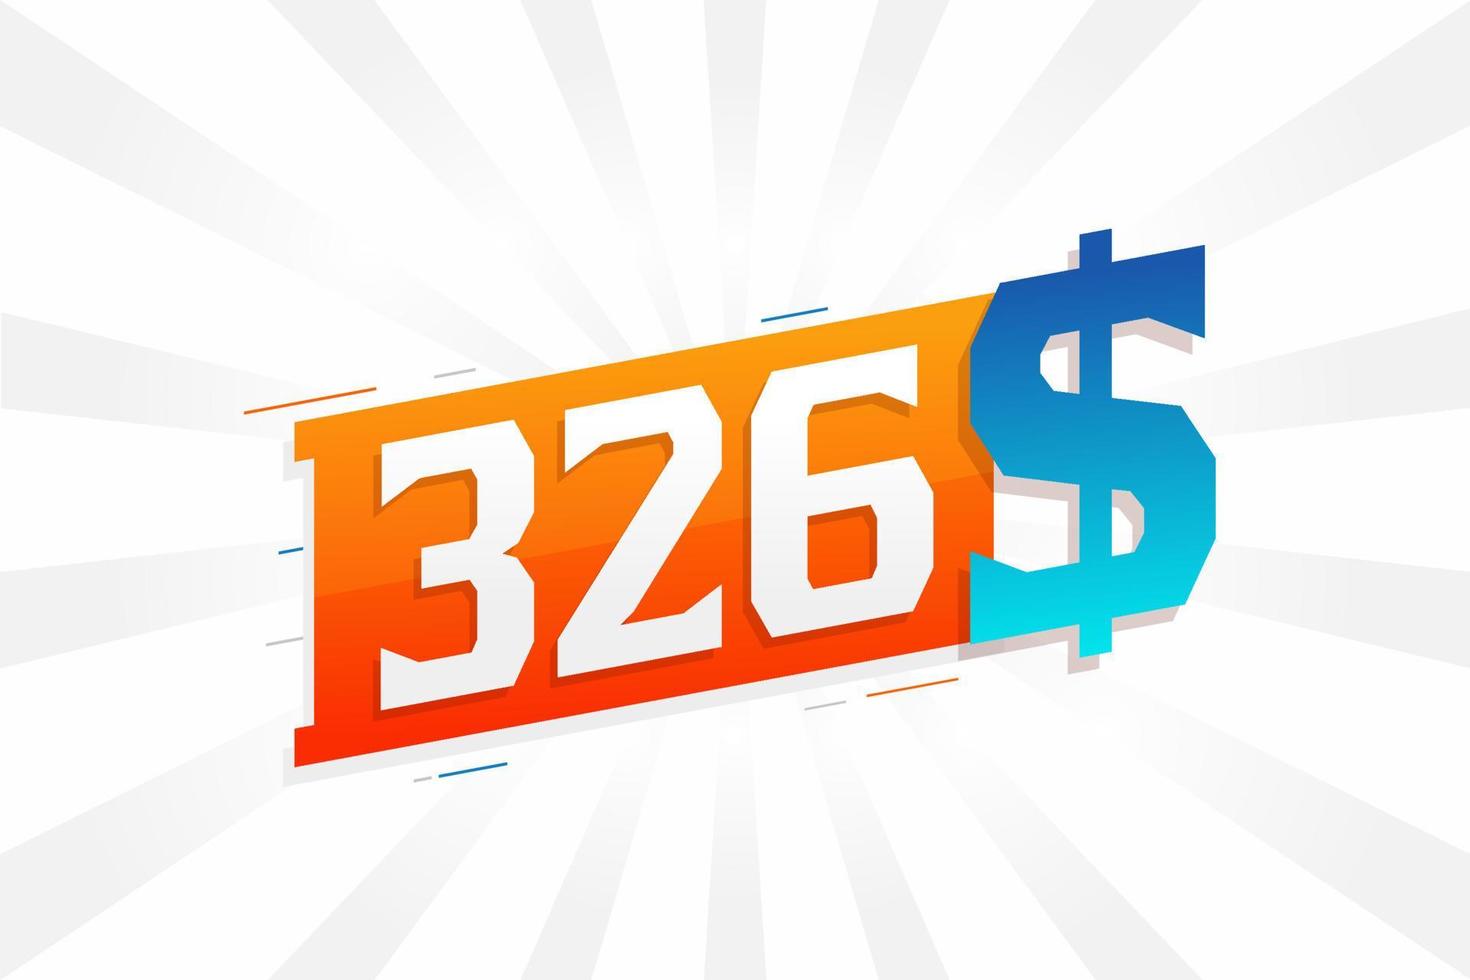 326 Dollar currency vector text symbol. 326 USD United States Dollar American Money stock vector